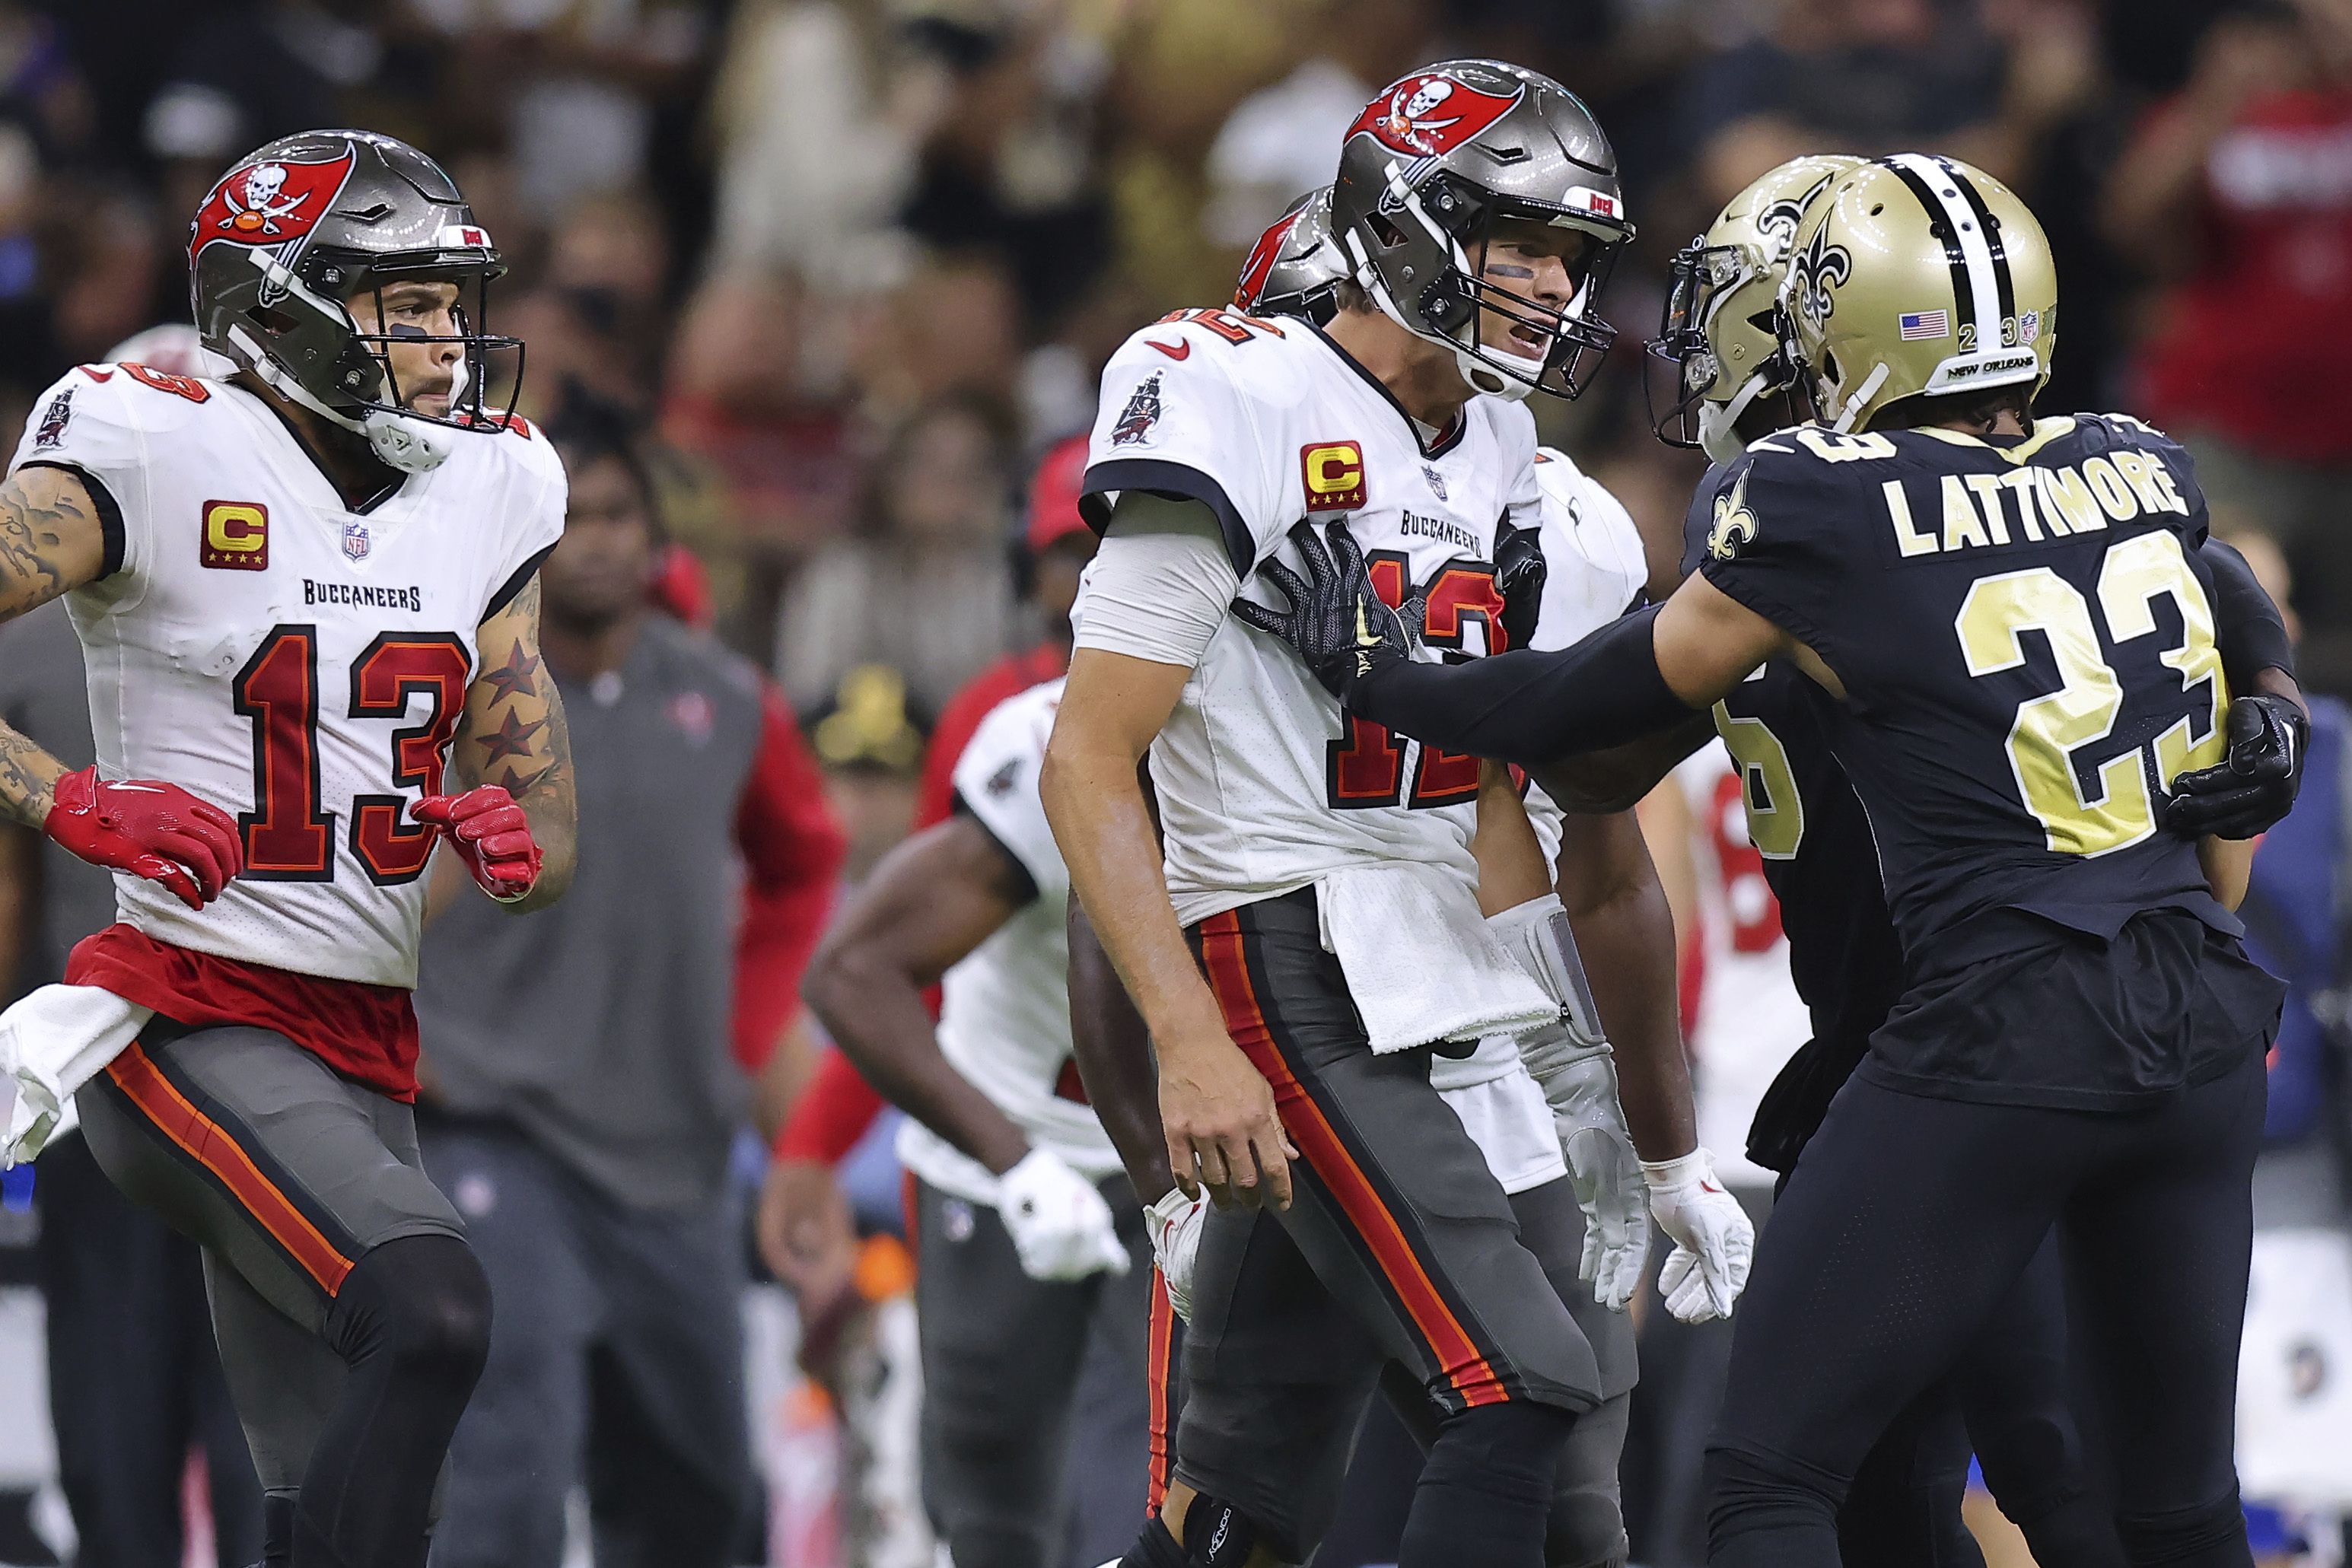 Mike Evans and Marshon Lattimore Ignite Brawl During the Buccaneers and Saints Game